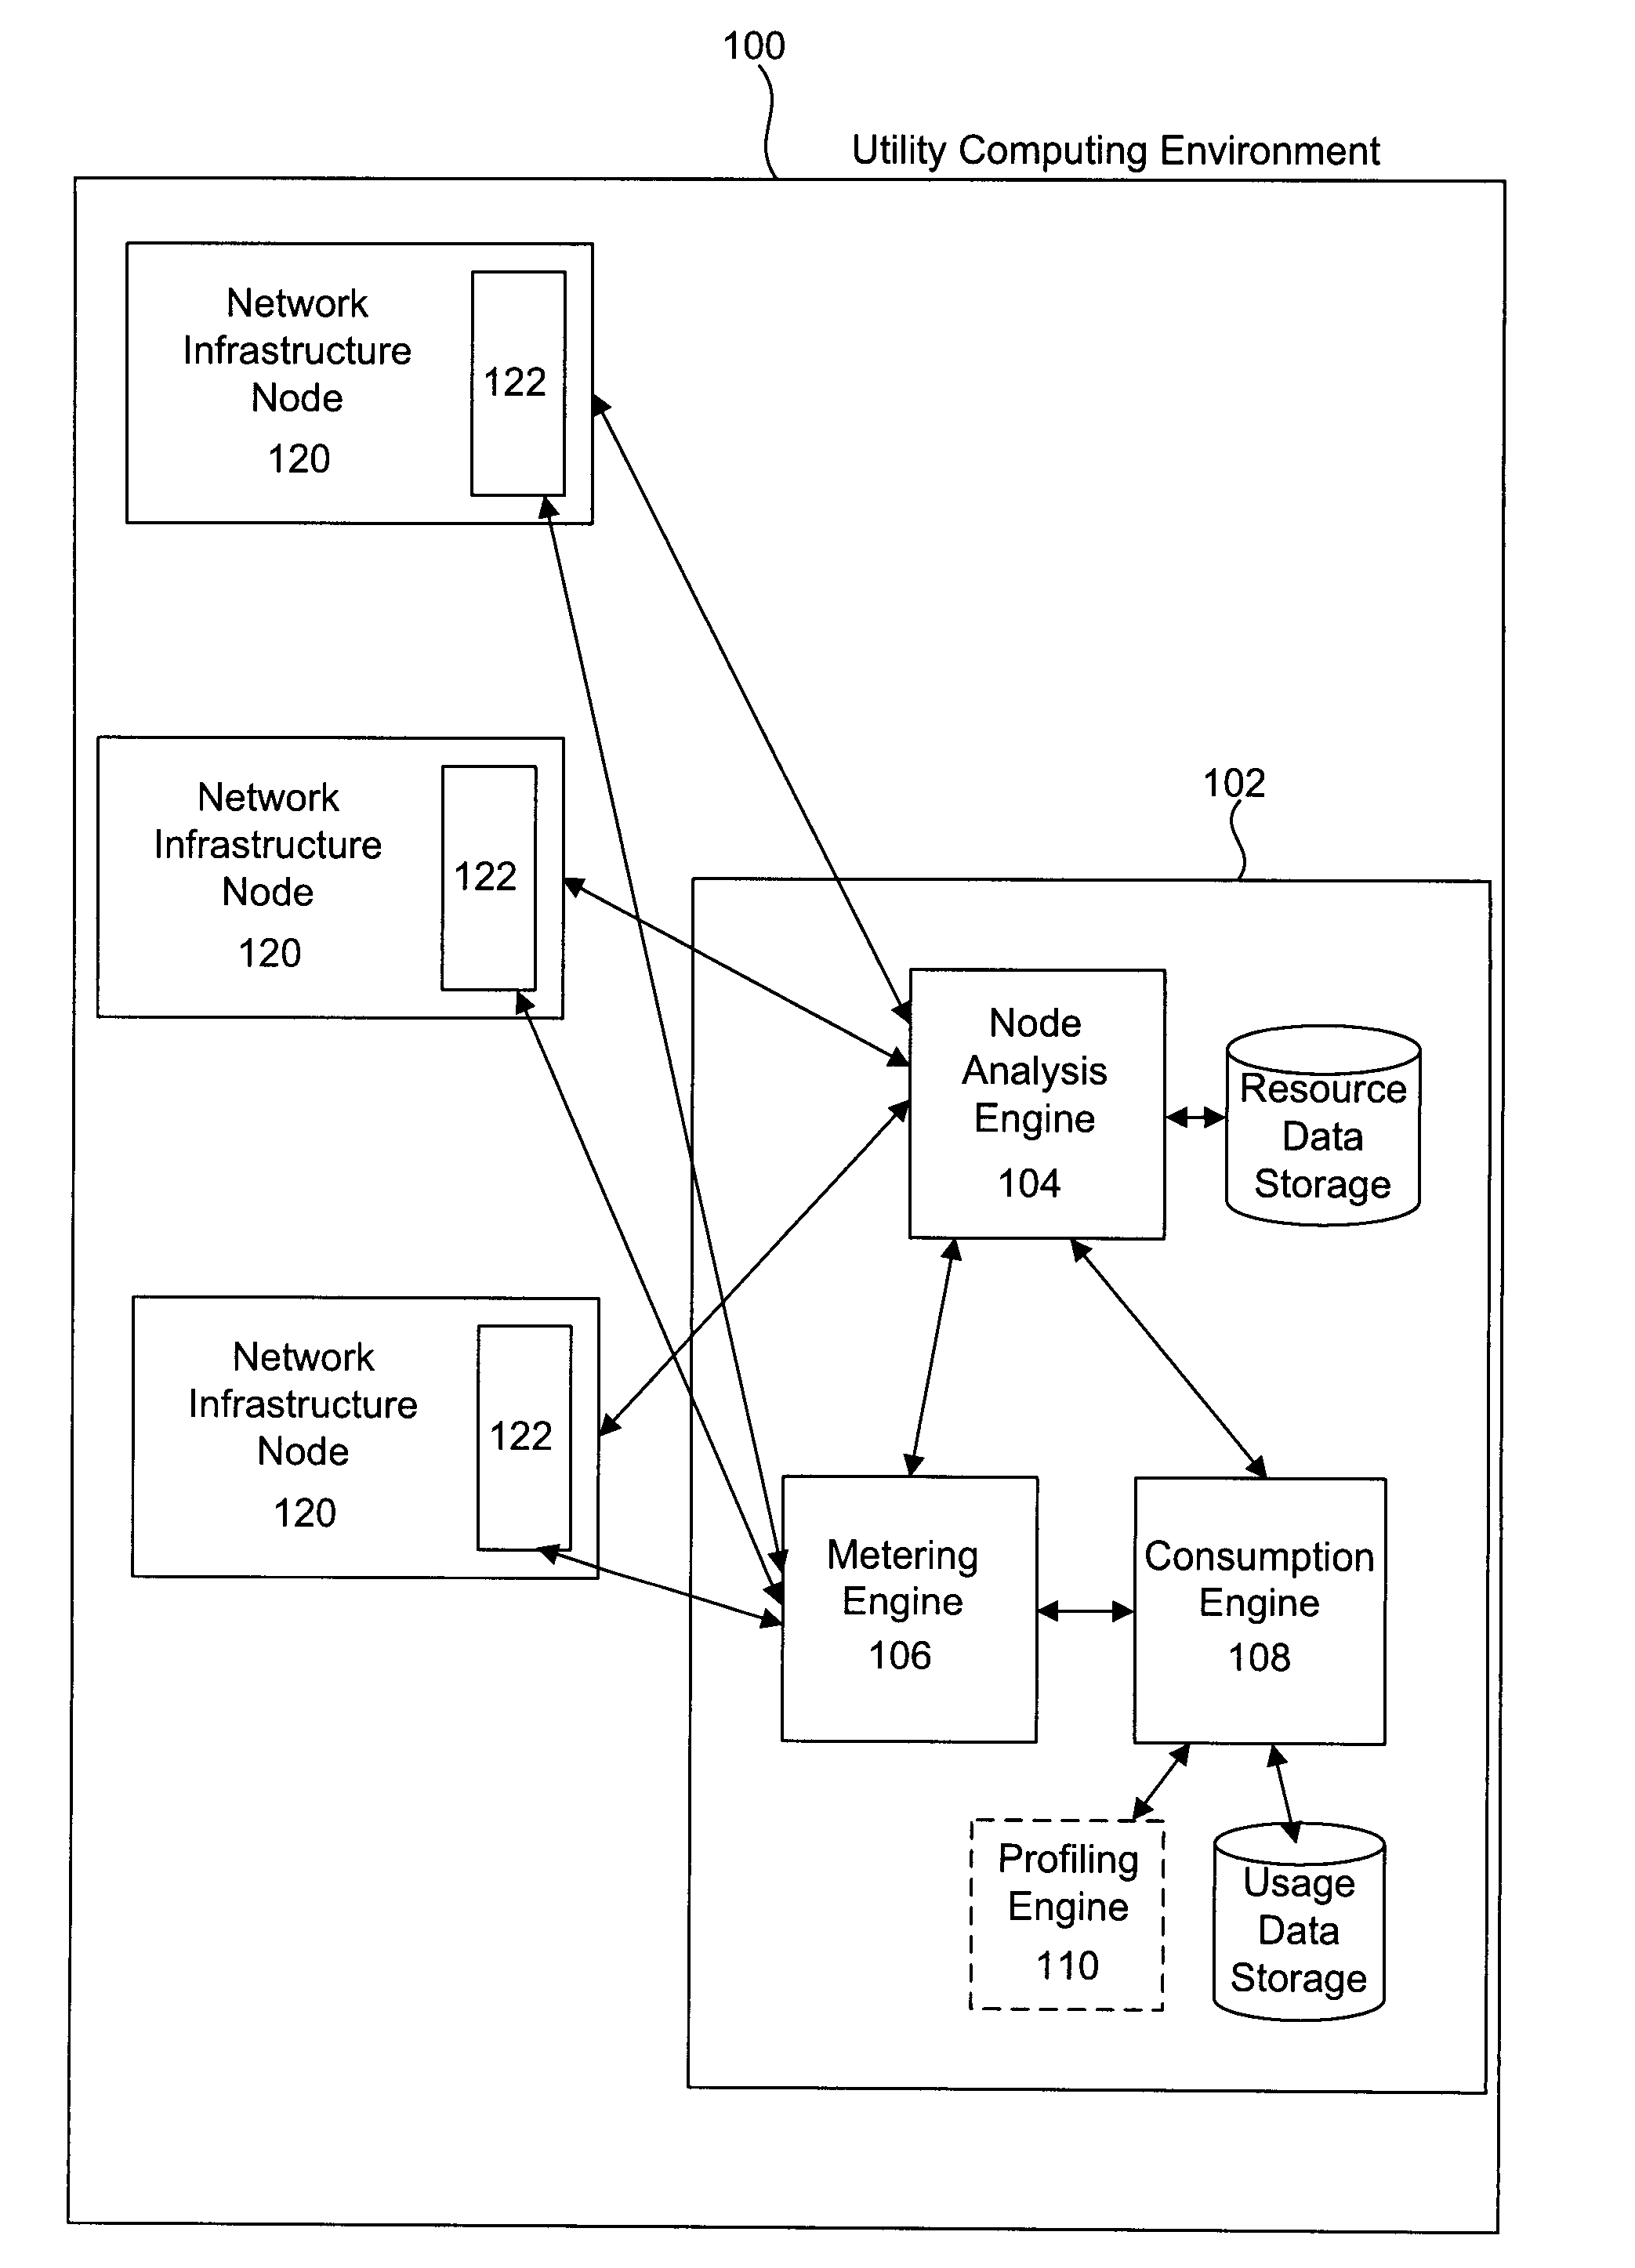 Method and System for Determining Computer Resource Usage in Utility Computing